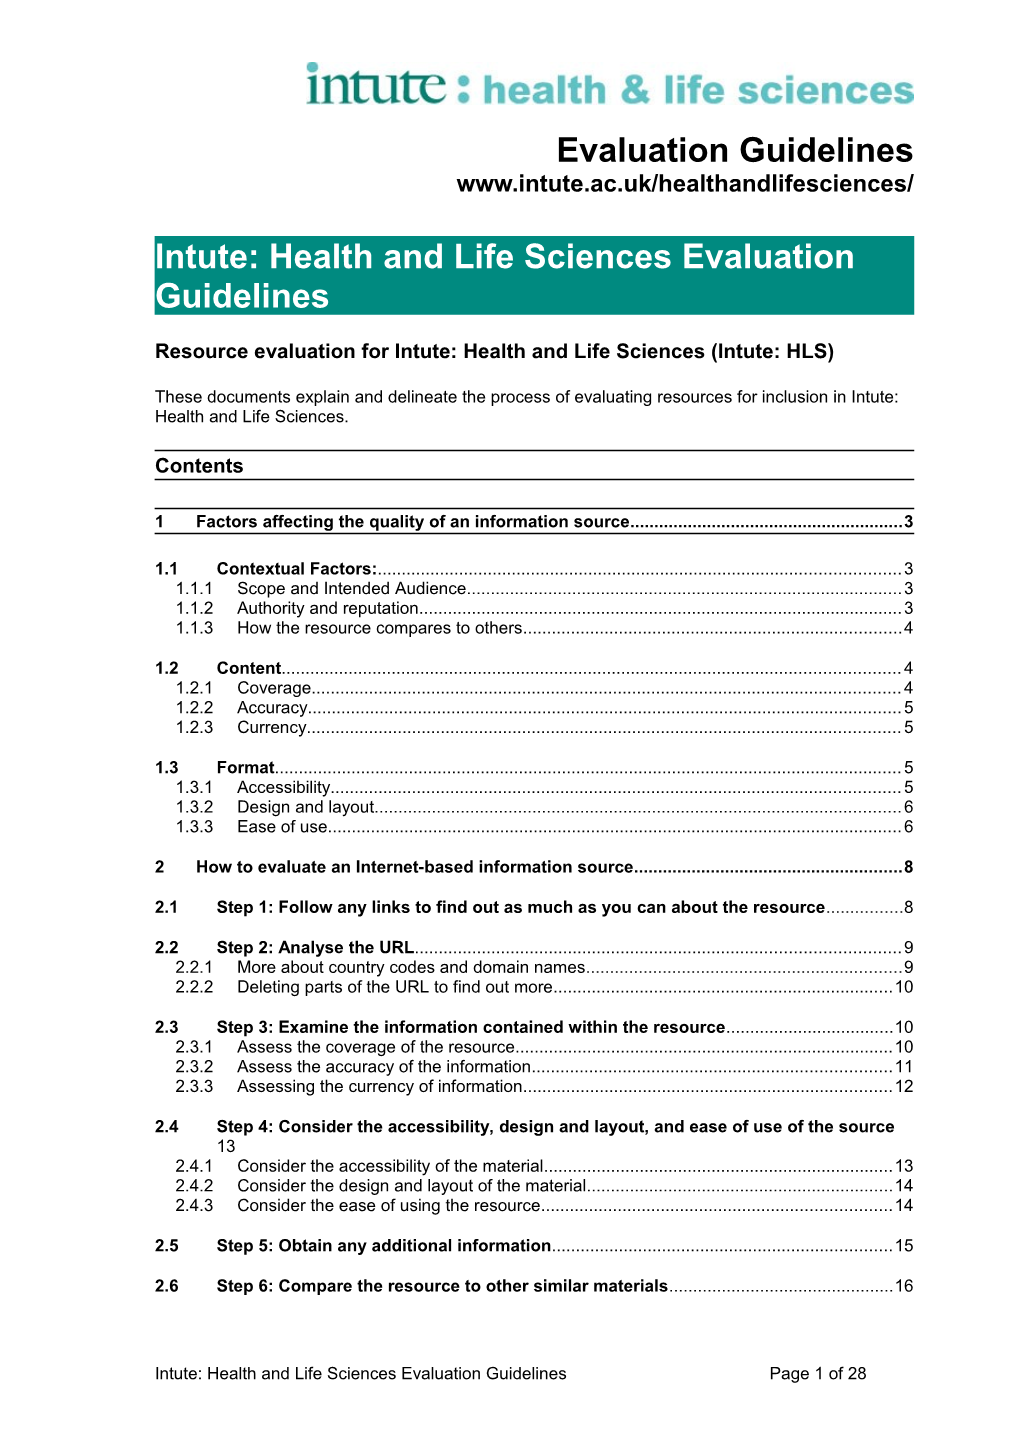 Intute: Health and Life Sciences Evaluation Guidelines